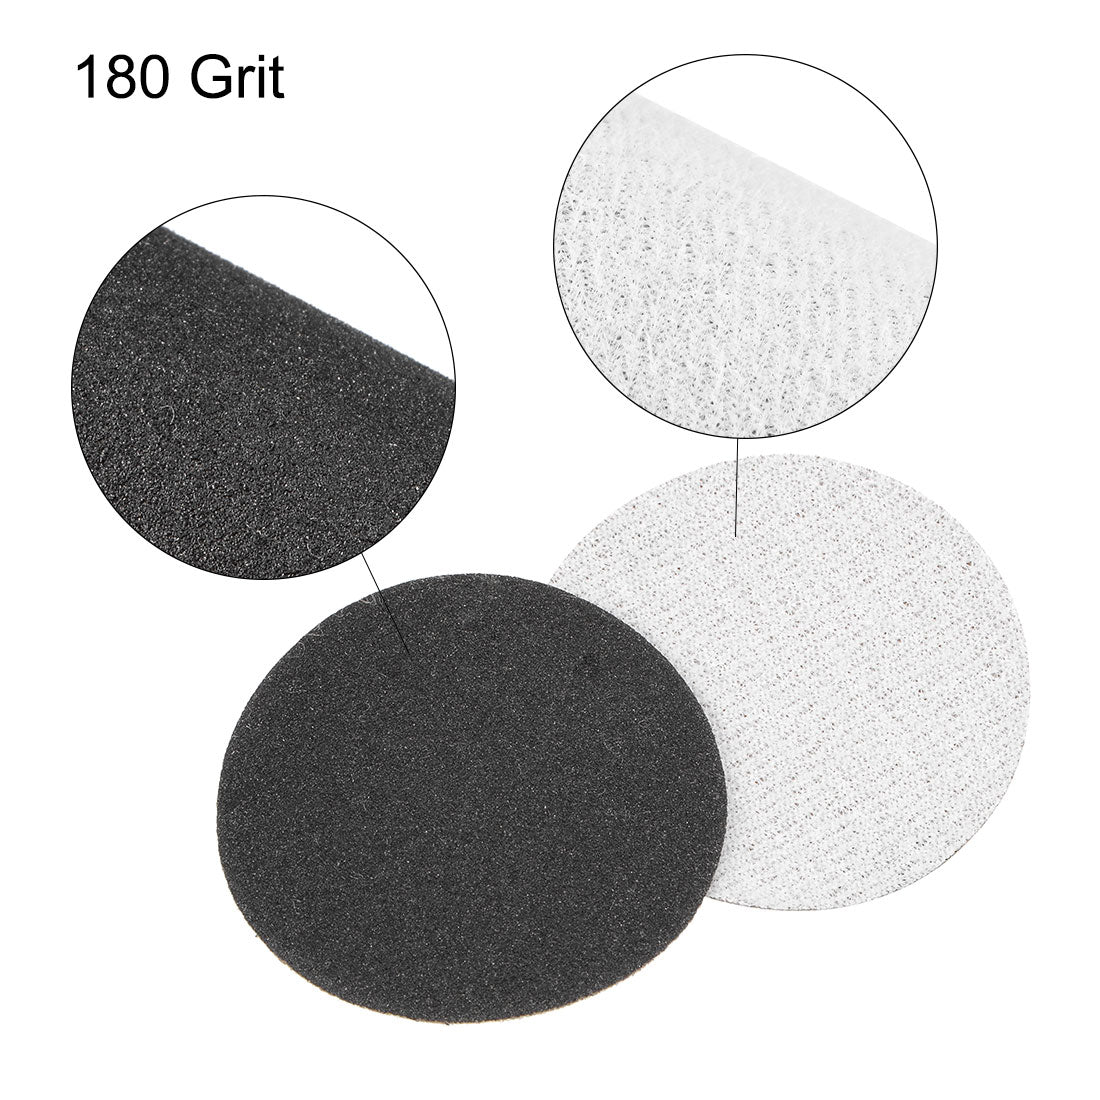 Uxcell Uxcell 2 inch Wet Dry Disc 400 Grit Hook and Loop Sanding Disc Silicon Carbide 30pcs